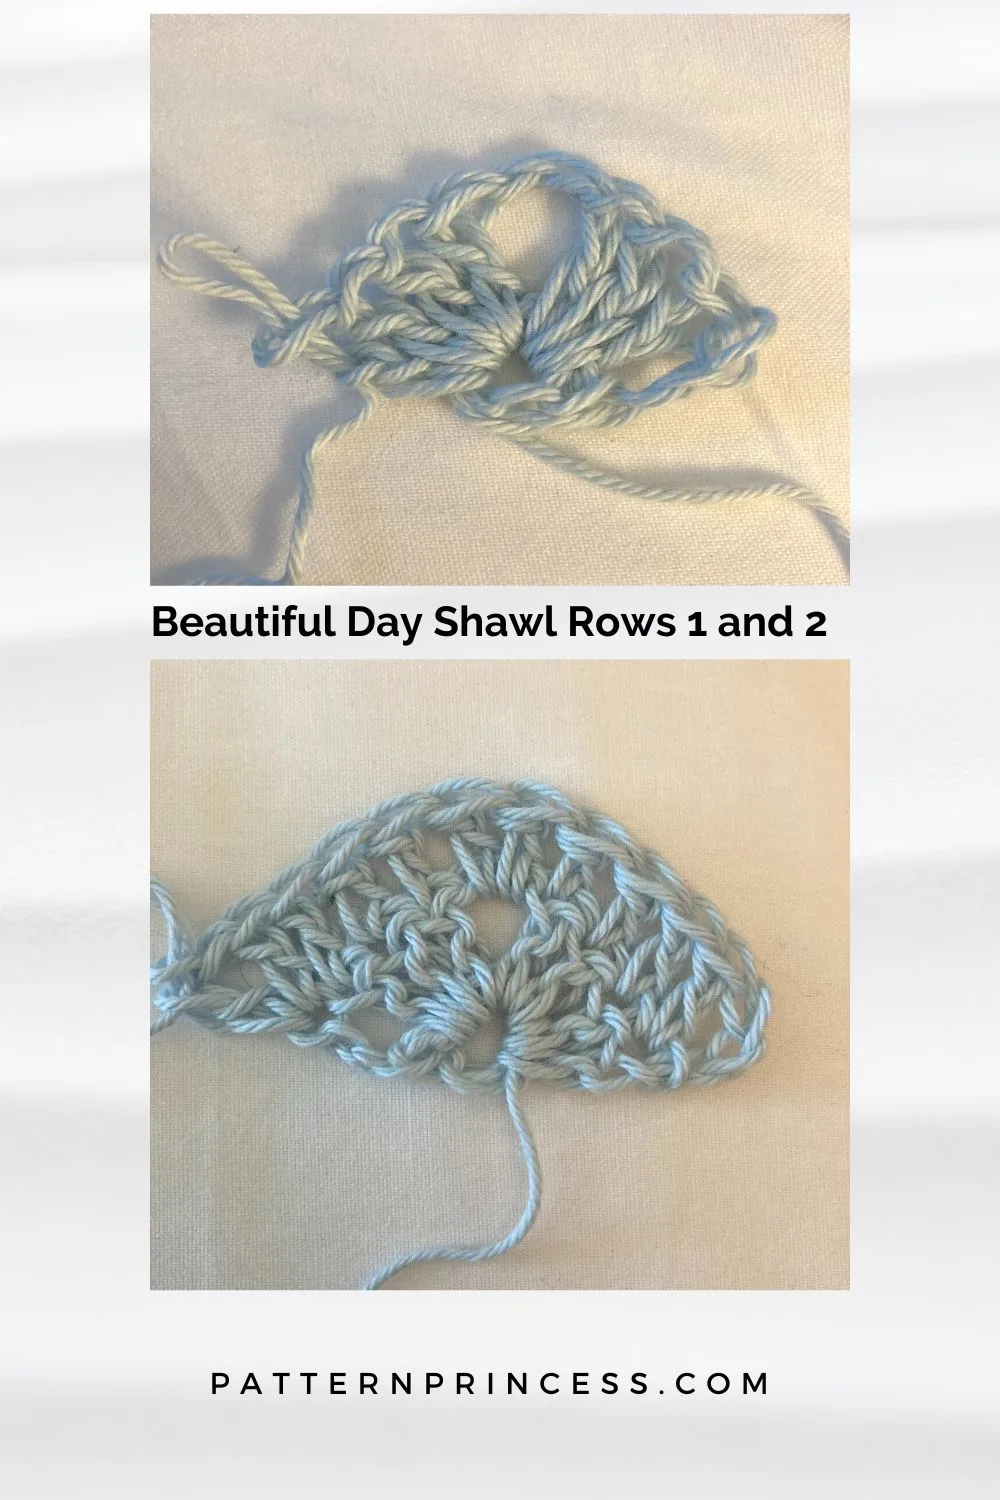 Beautiful Day Shawl Rows 1 and 2